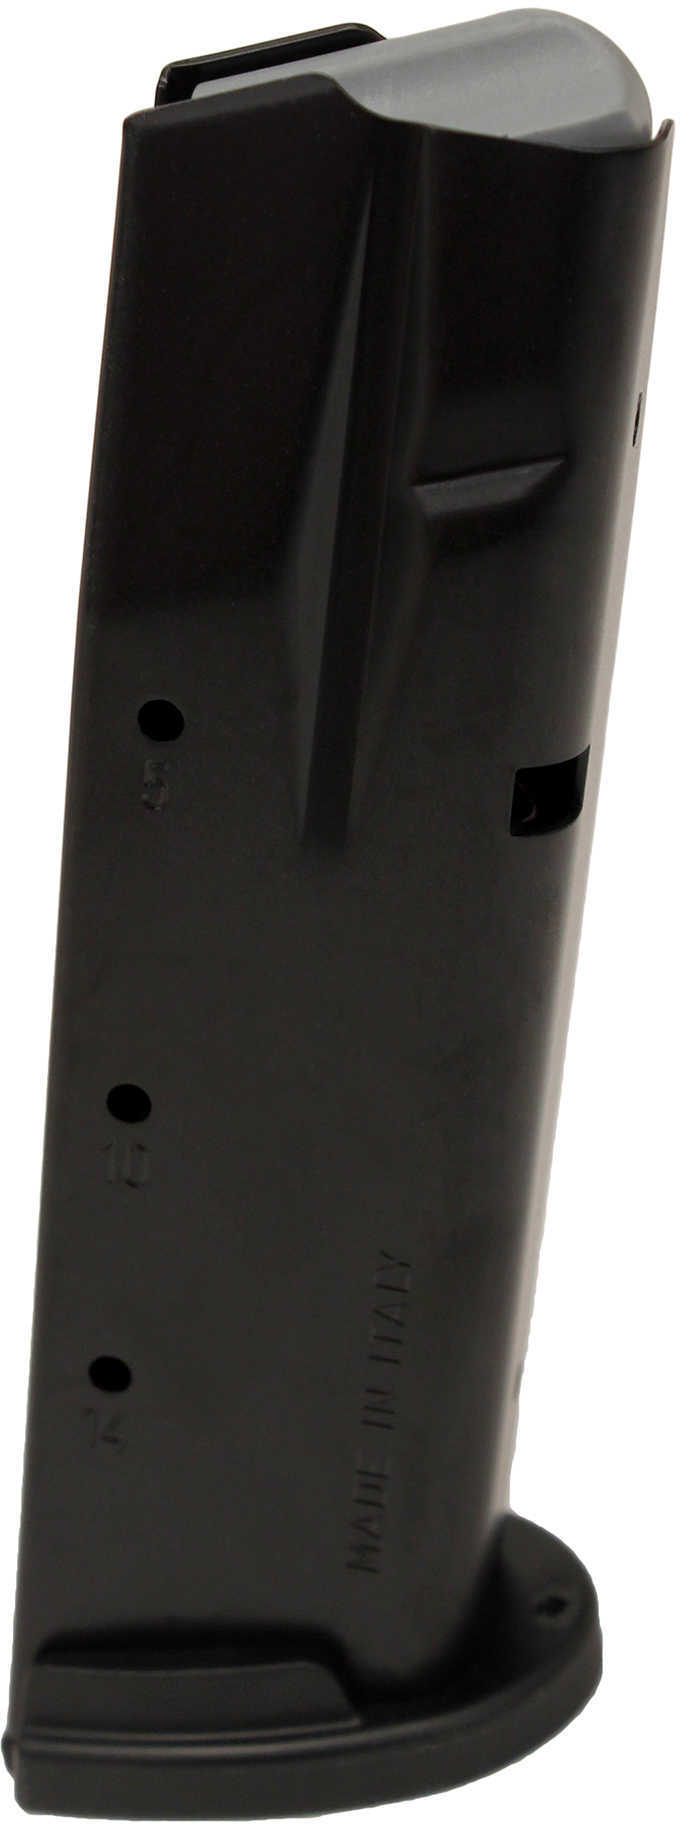 Sig Mag P250 P320 40 S&W 357Sig Full Size 14Rd